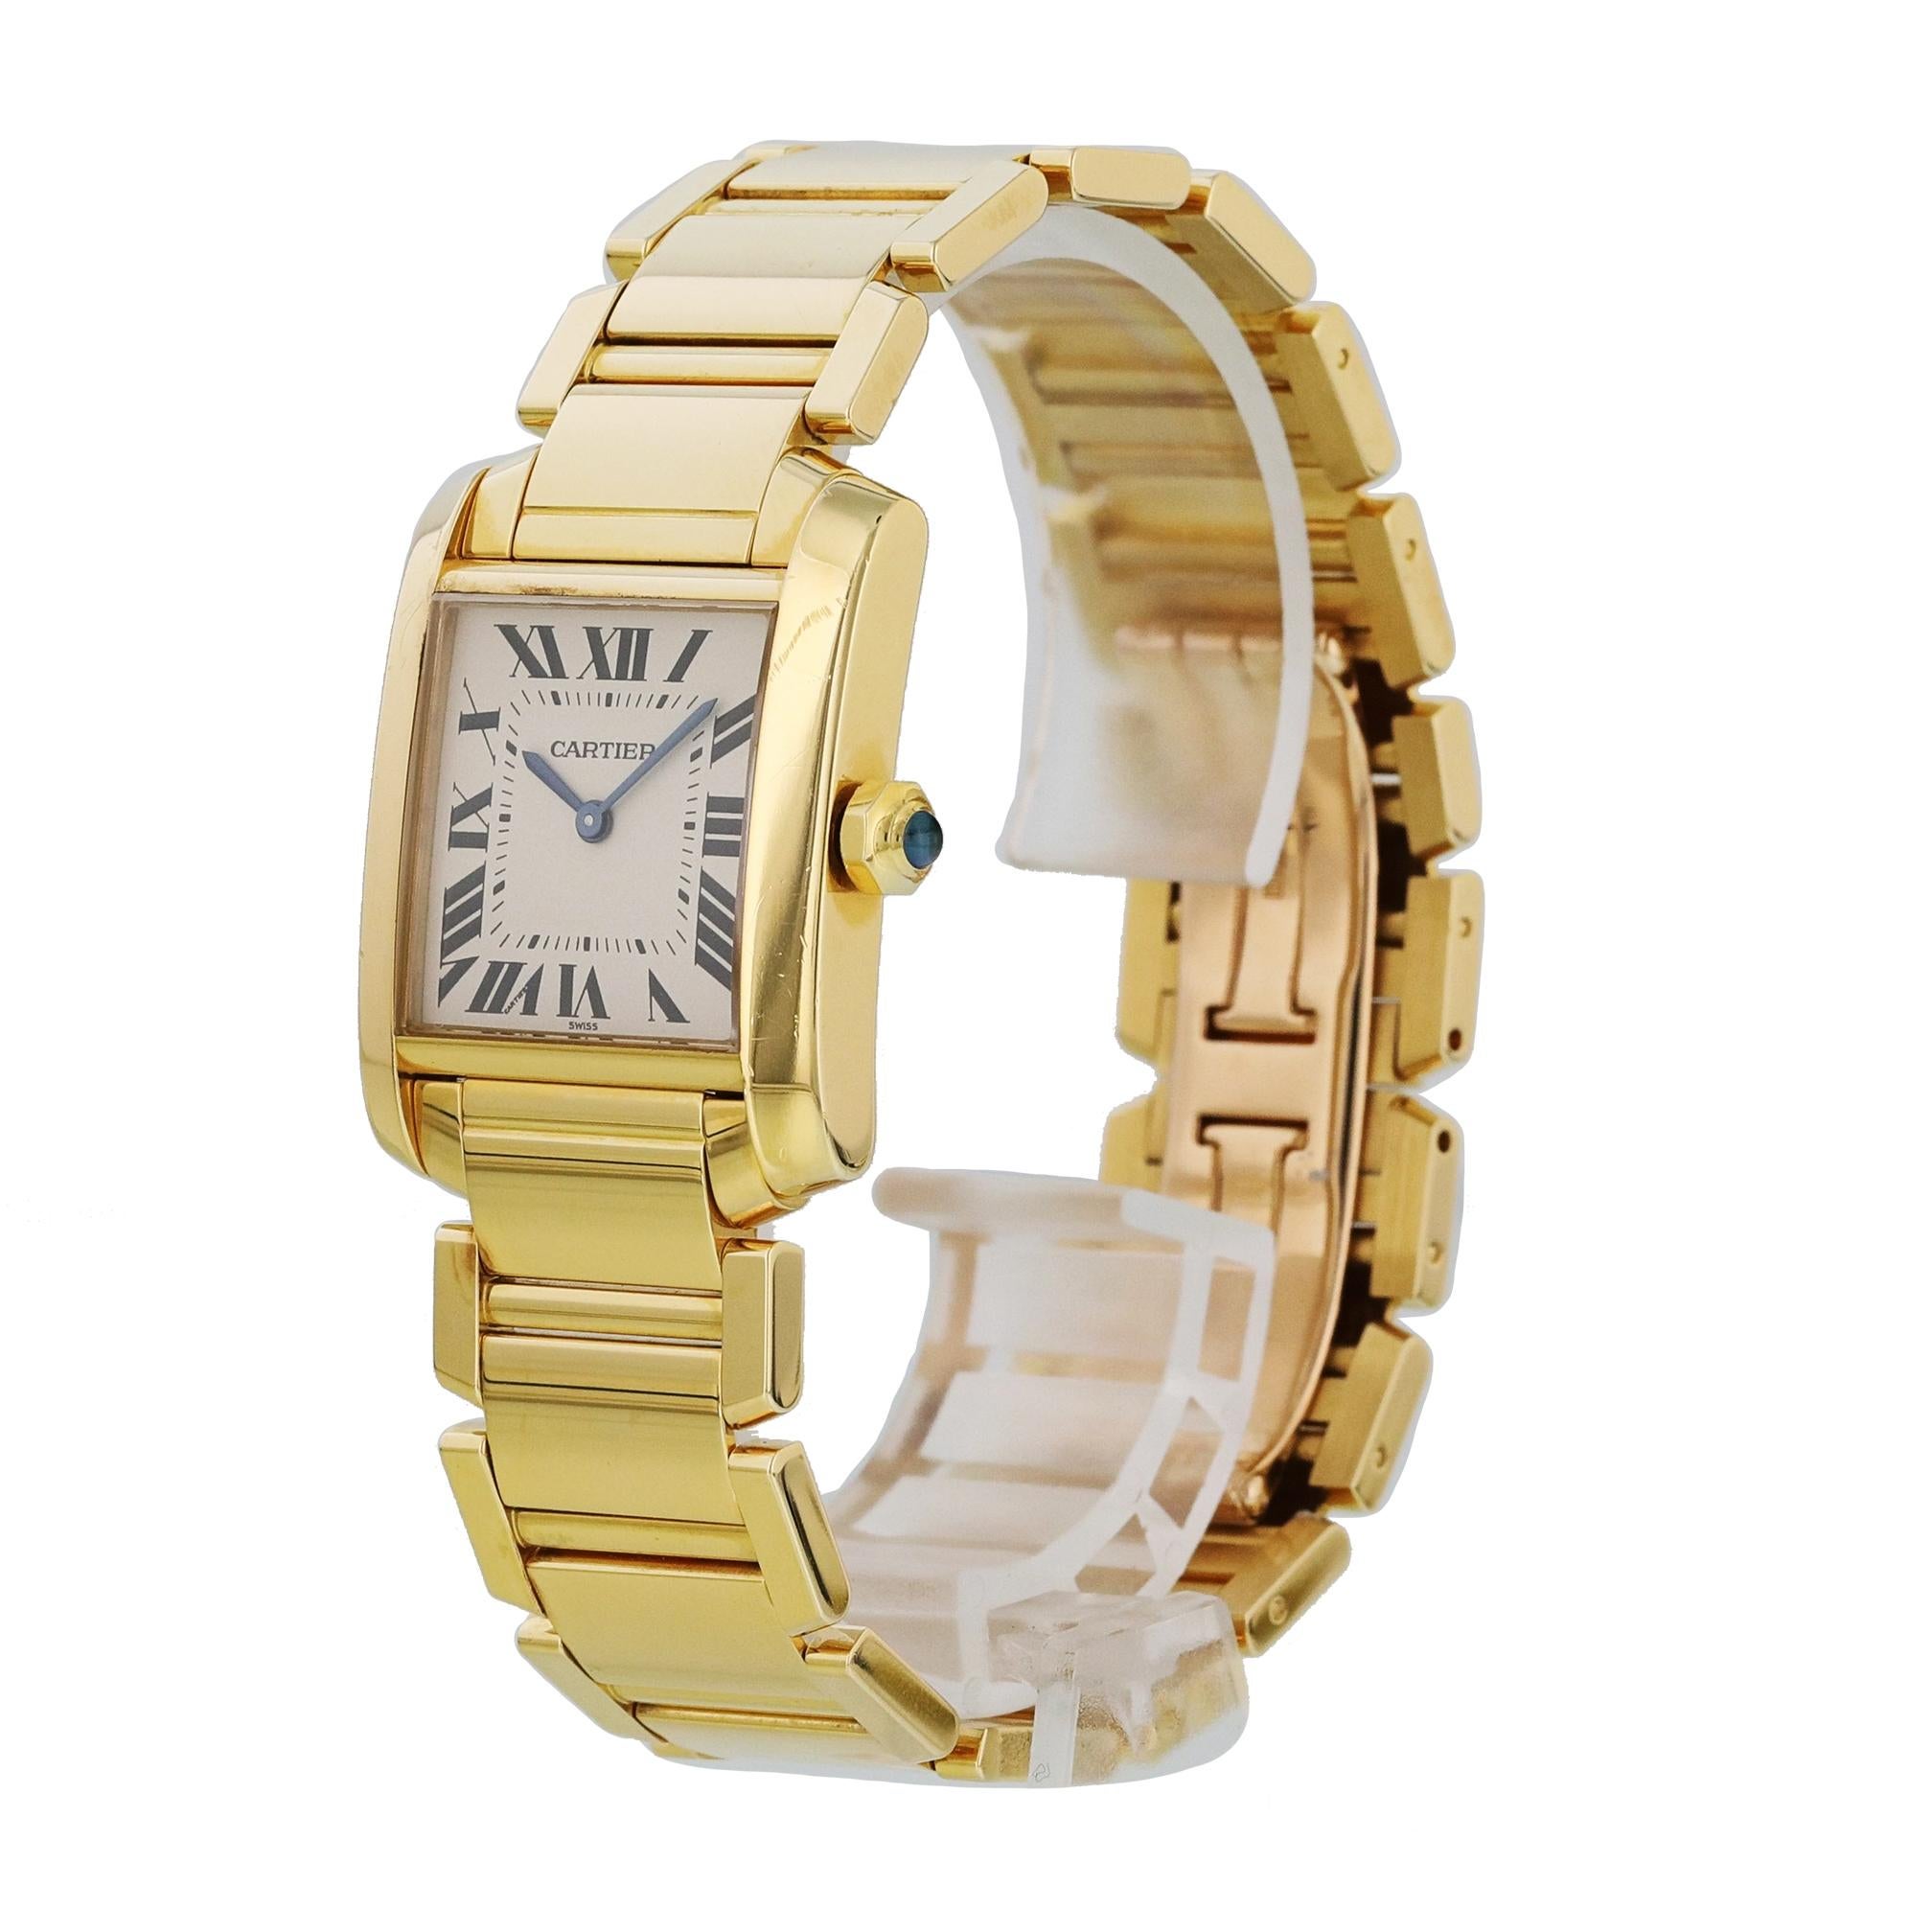 Cartier Tank Francaise 1821 Ladies Watch. 
25mm 18k Yellow Gold case. 
Yellow Gold bezel. 
White dial with Blue steel hands and roman numeral hour markers. 
Minute markers on the inner dial. 
18k Yellow Gold Bracelet with Butterfly Clasp. 
Will fit